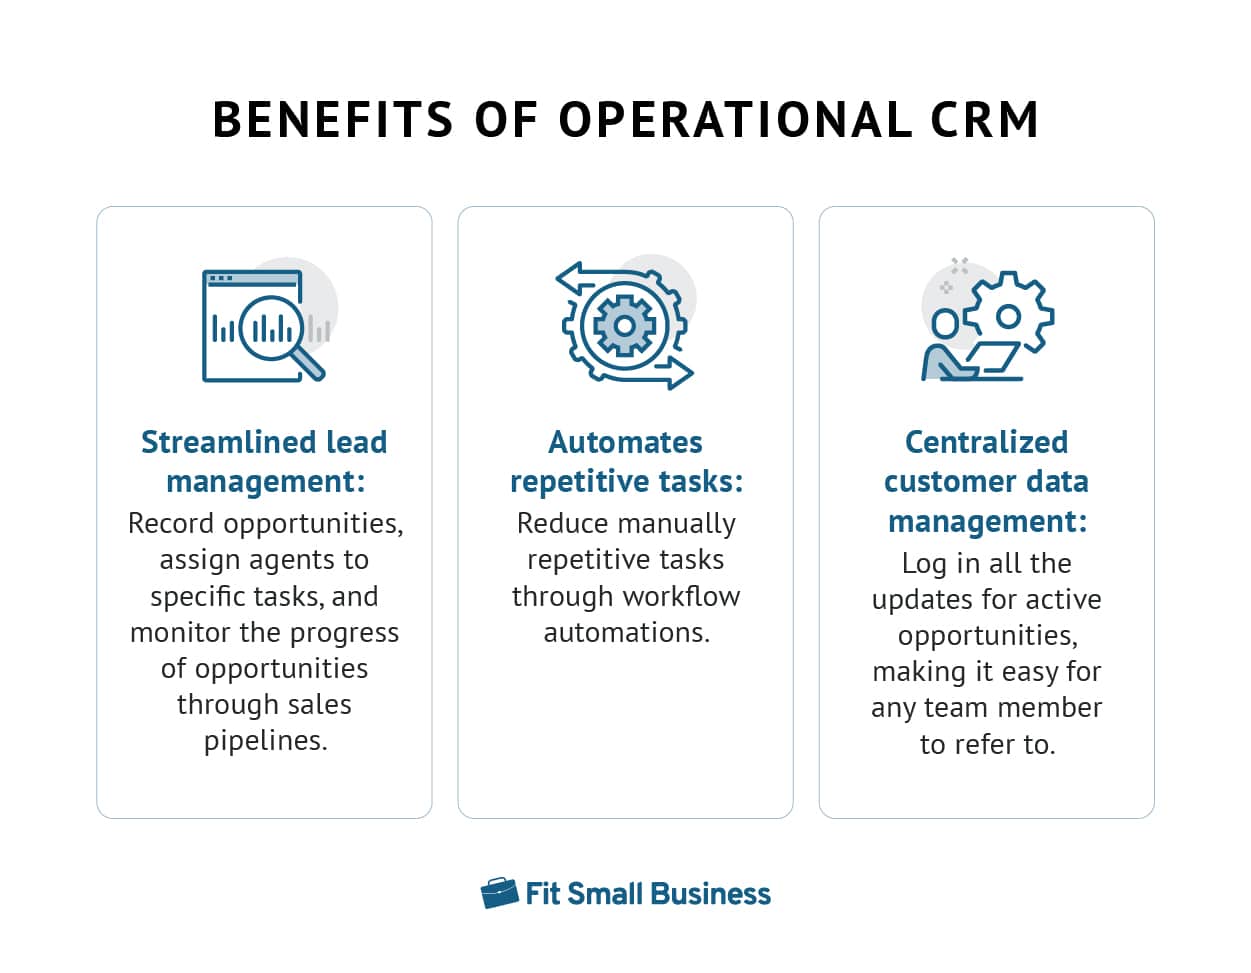 The 3 Benefits of Operational CRM.